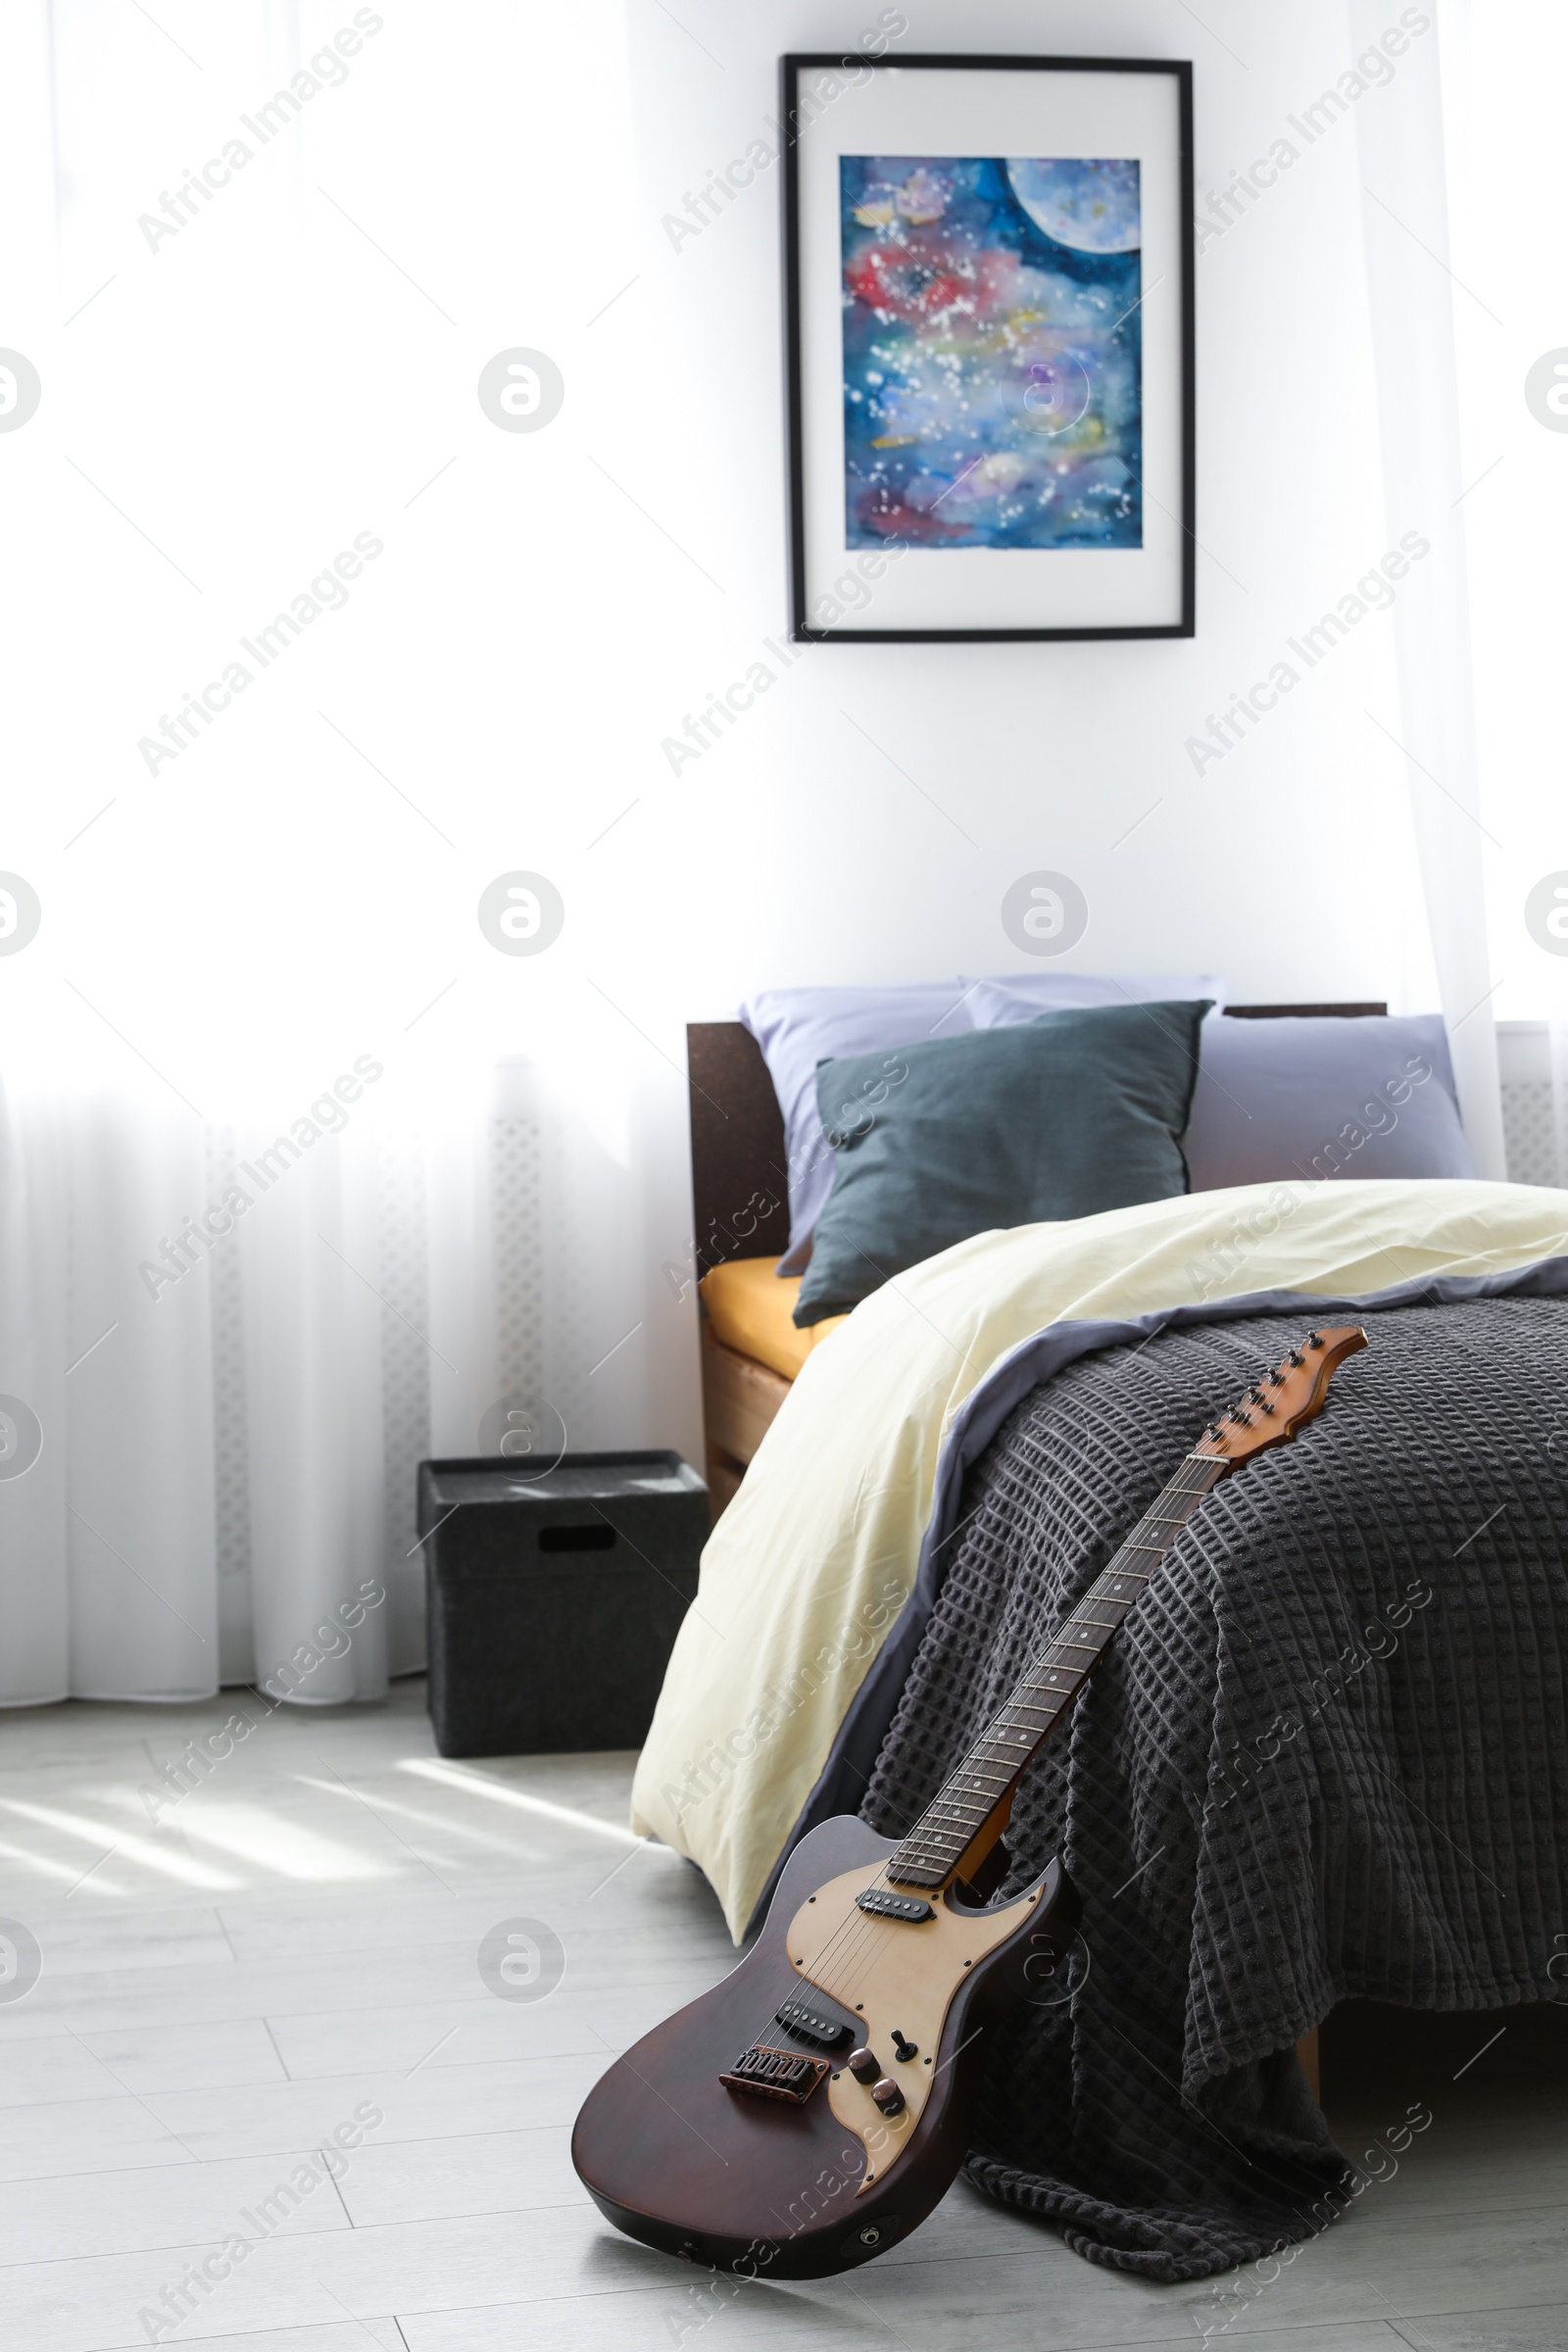 Photo of Electric guitar near bed in modern teenager's room interior